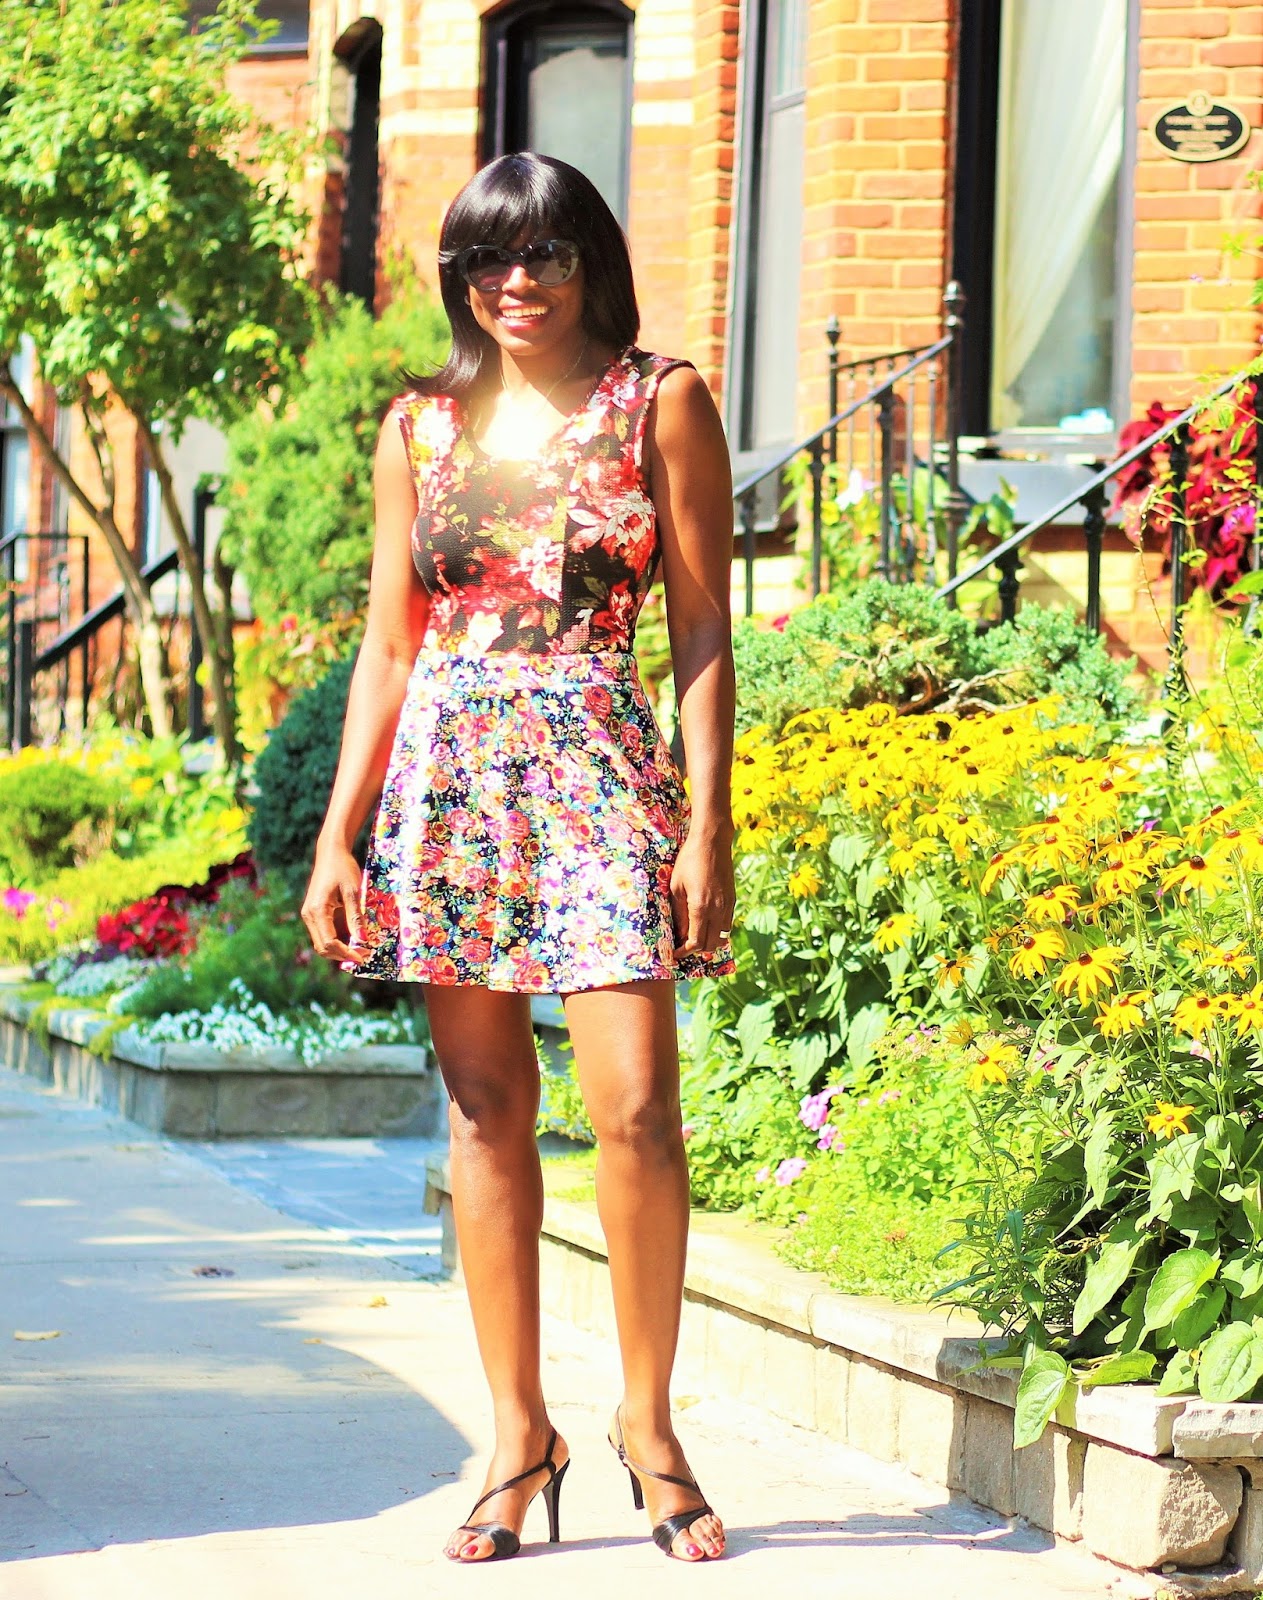 Peplum Top Styled With A Skater Skirt